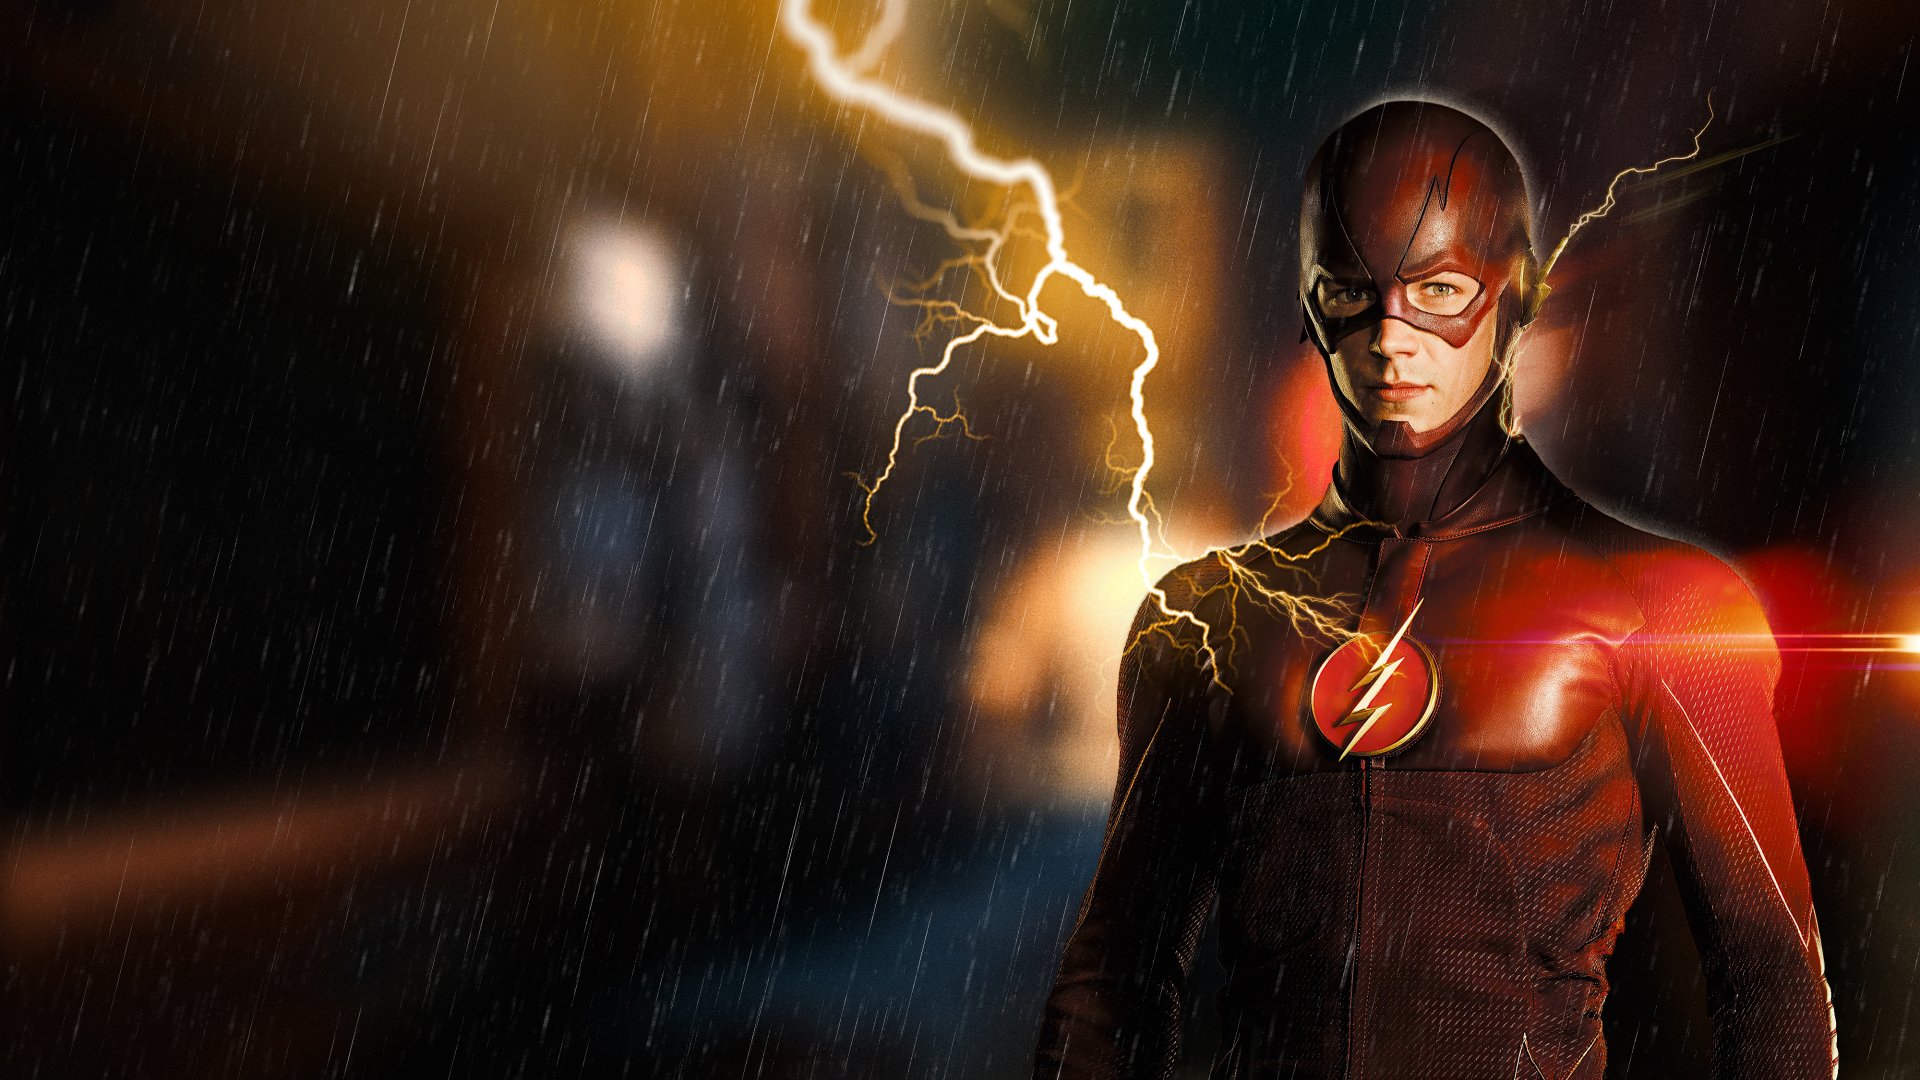 The Flash (2014) 4k Ultra HD Wallpaper | Background Image | 4000x2250